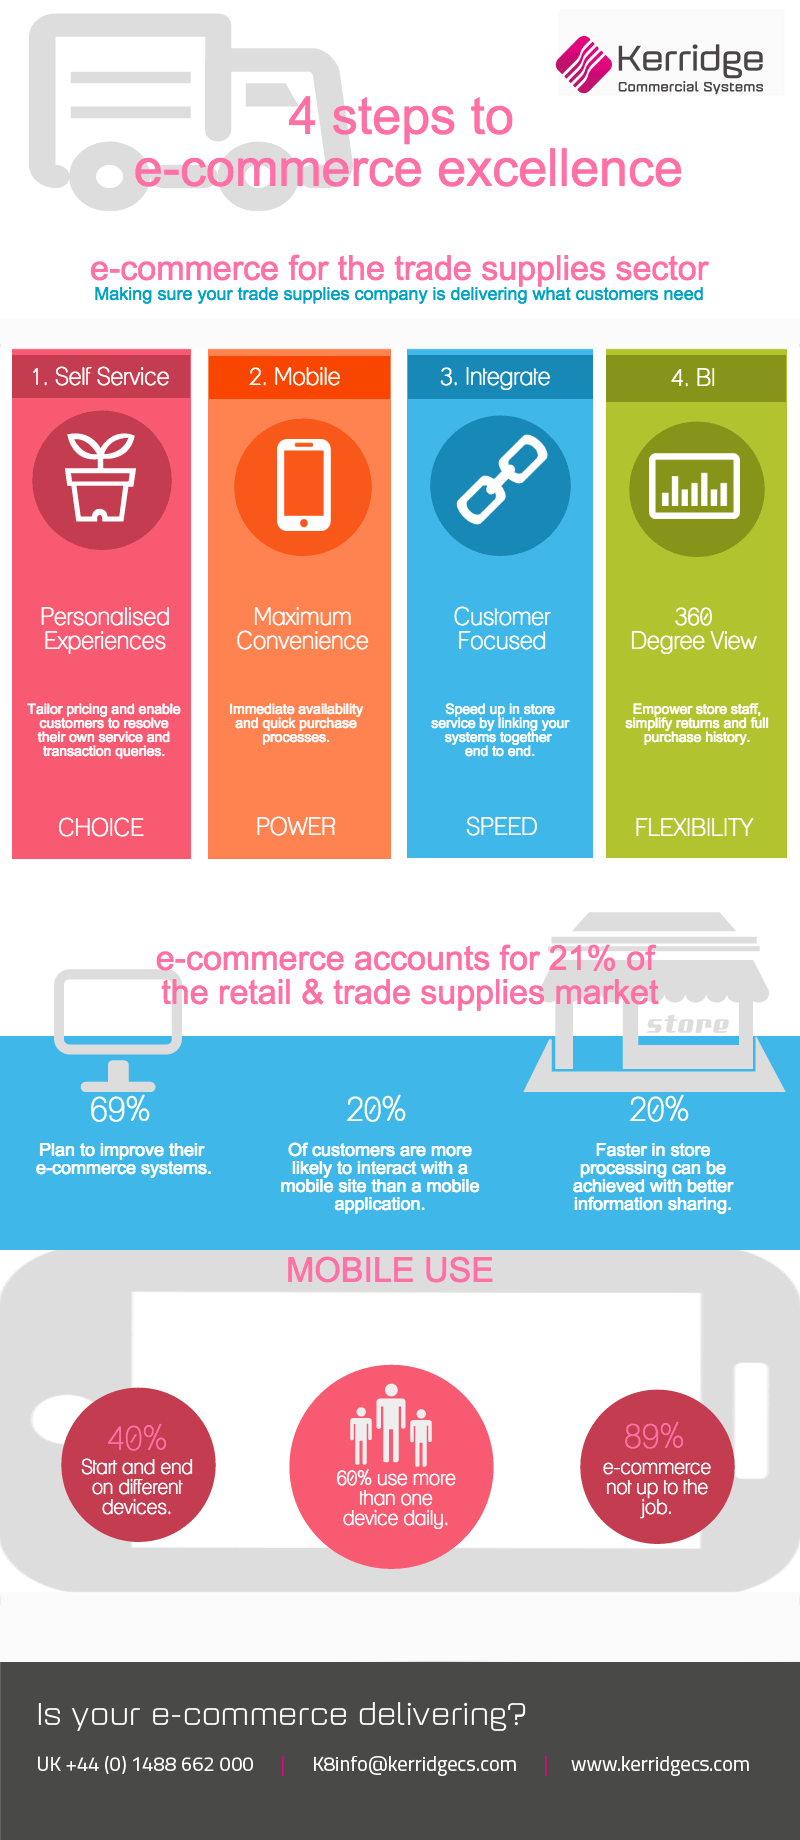 4 Steps to e-commerce excellence inforgraphics from Kerridge Commercial Systems